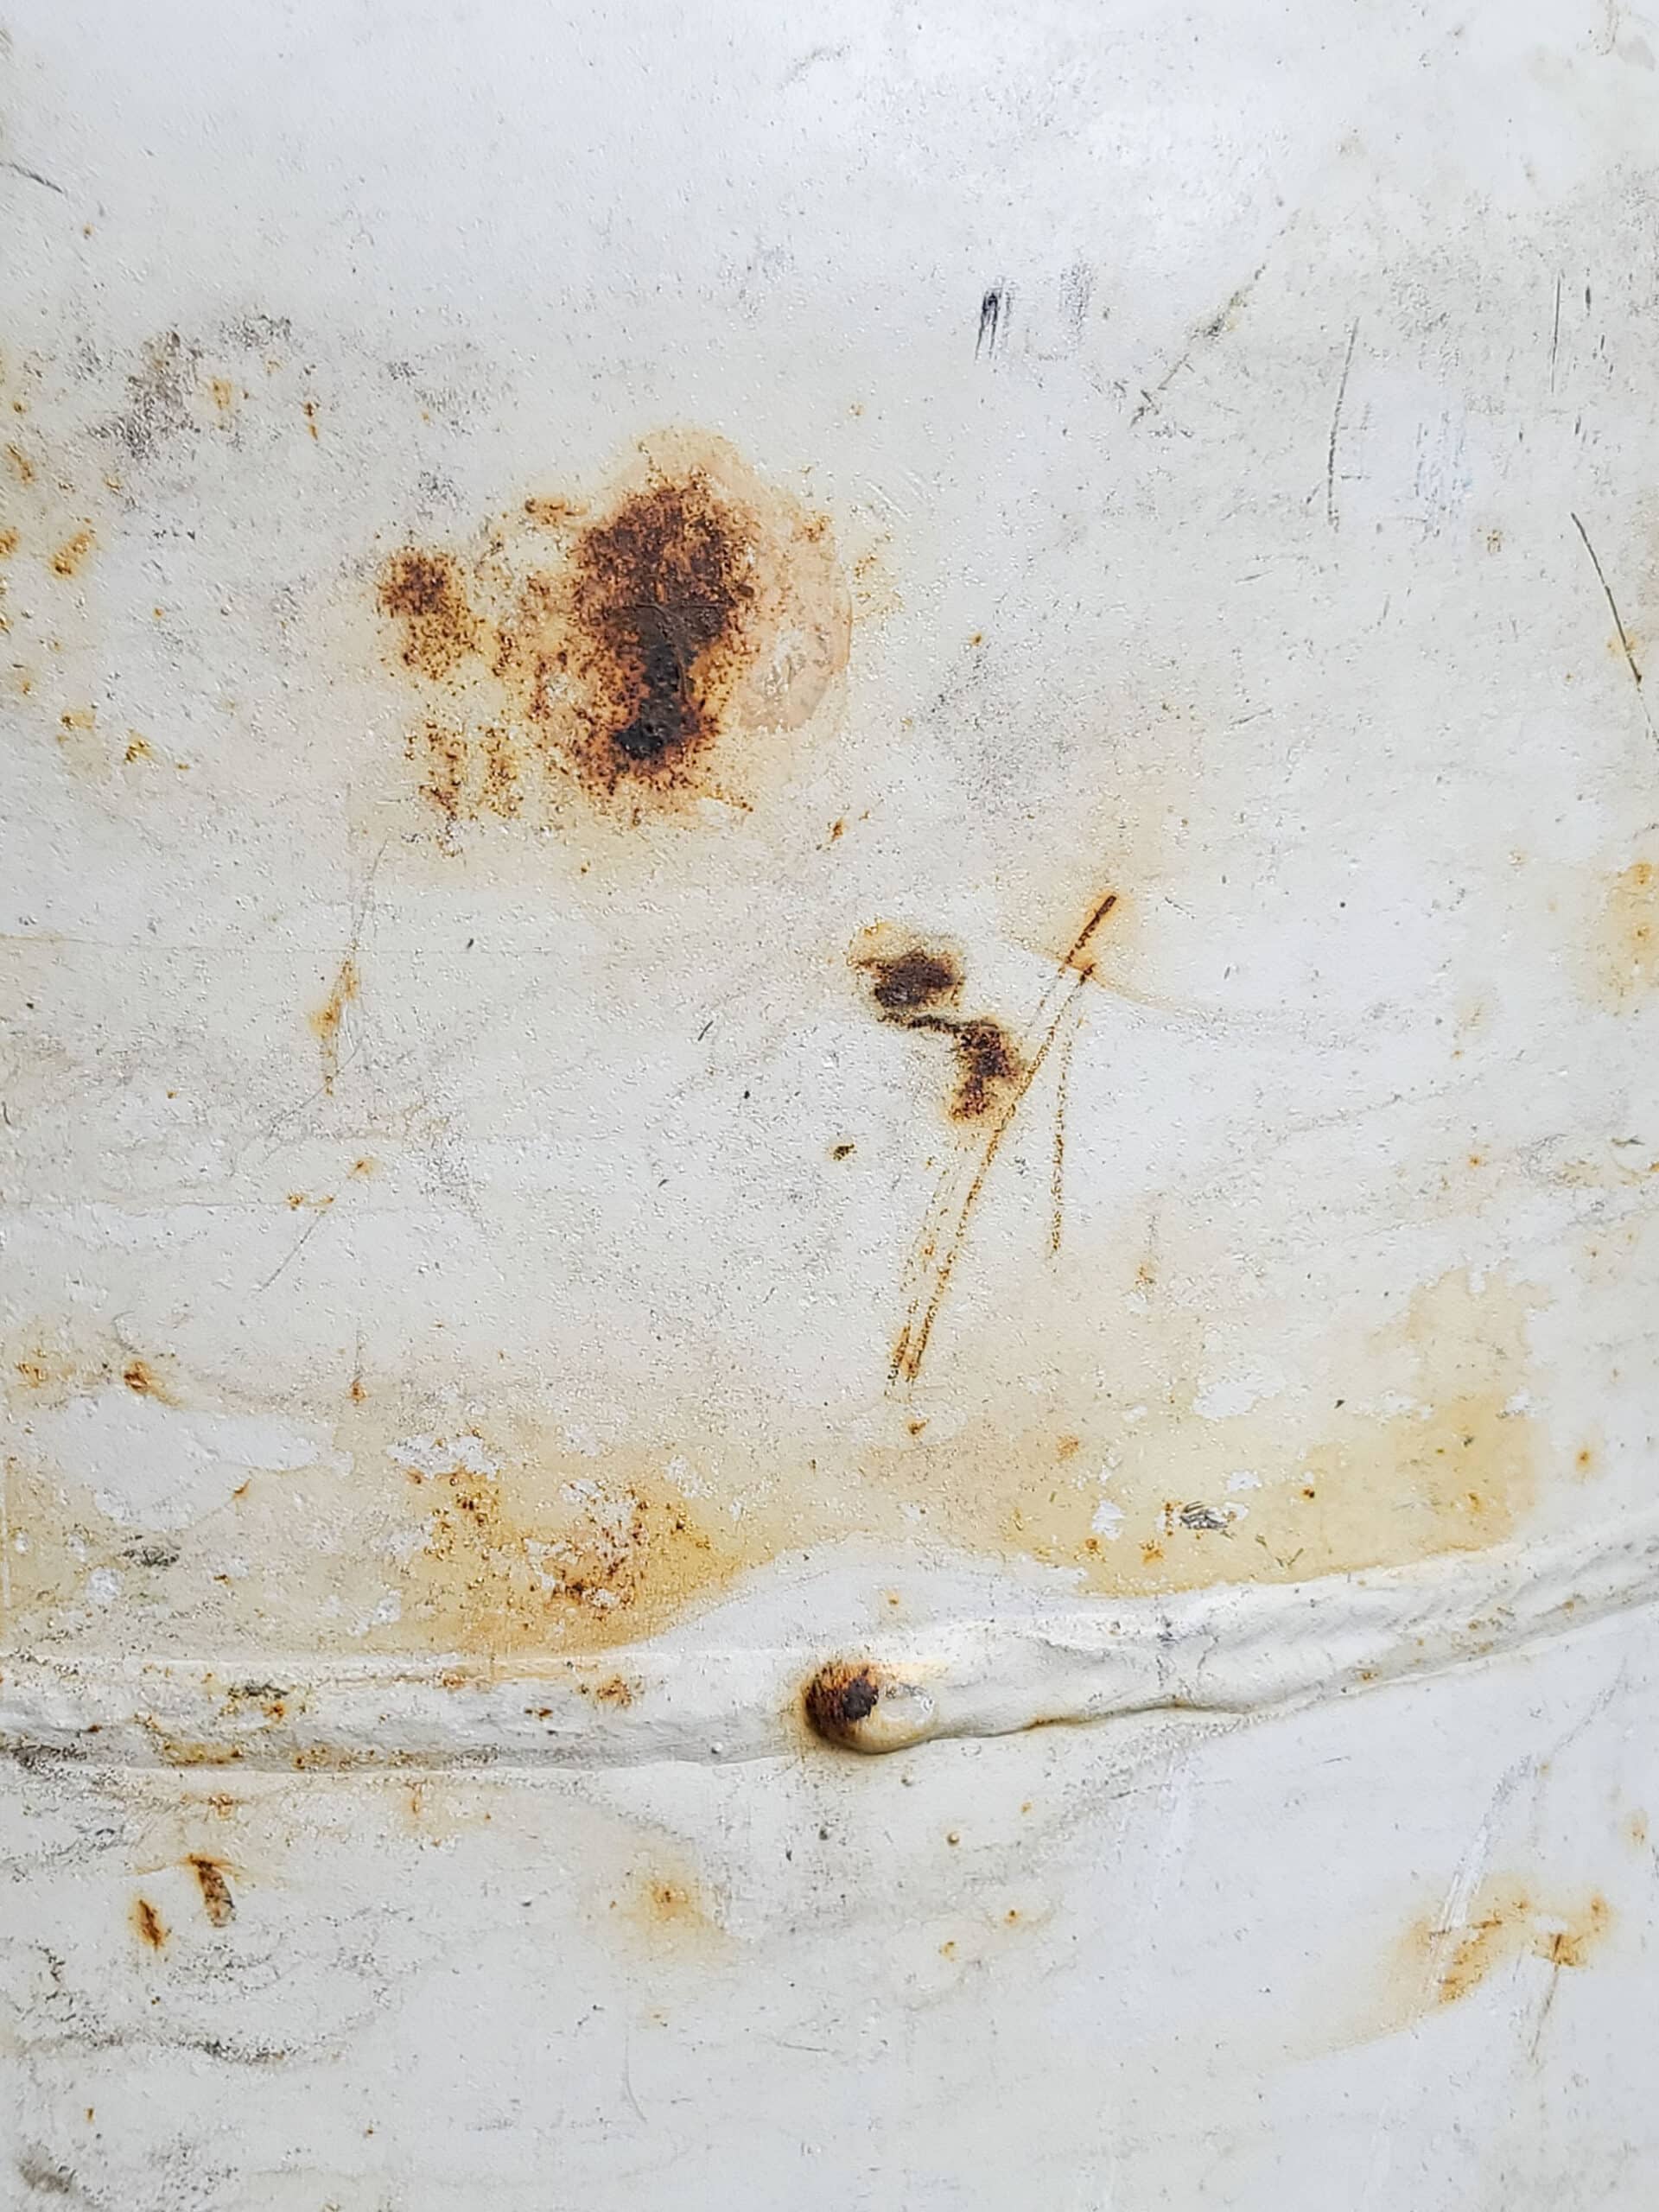 A side view of a white barbecue propane tank.  Some surface rust is seen.